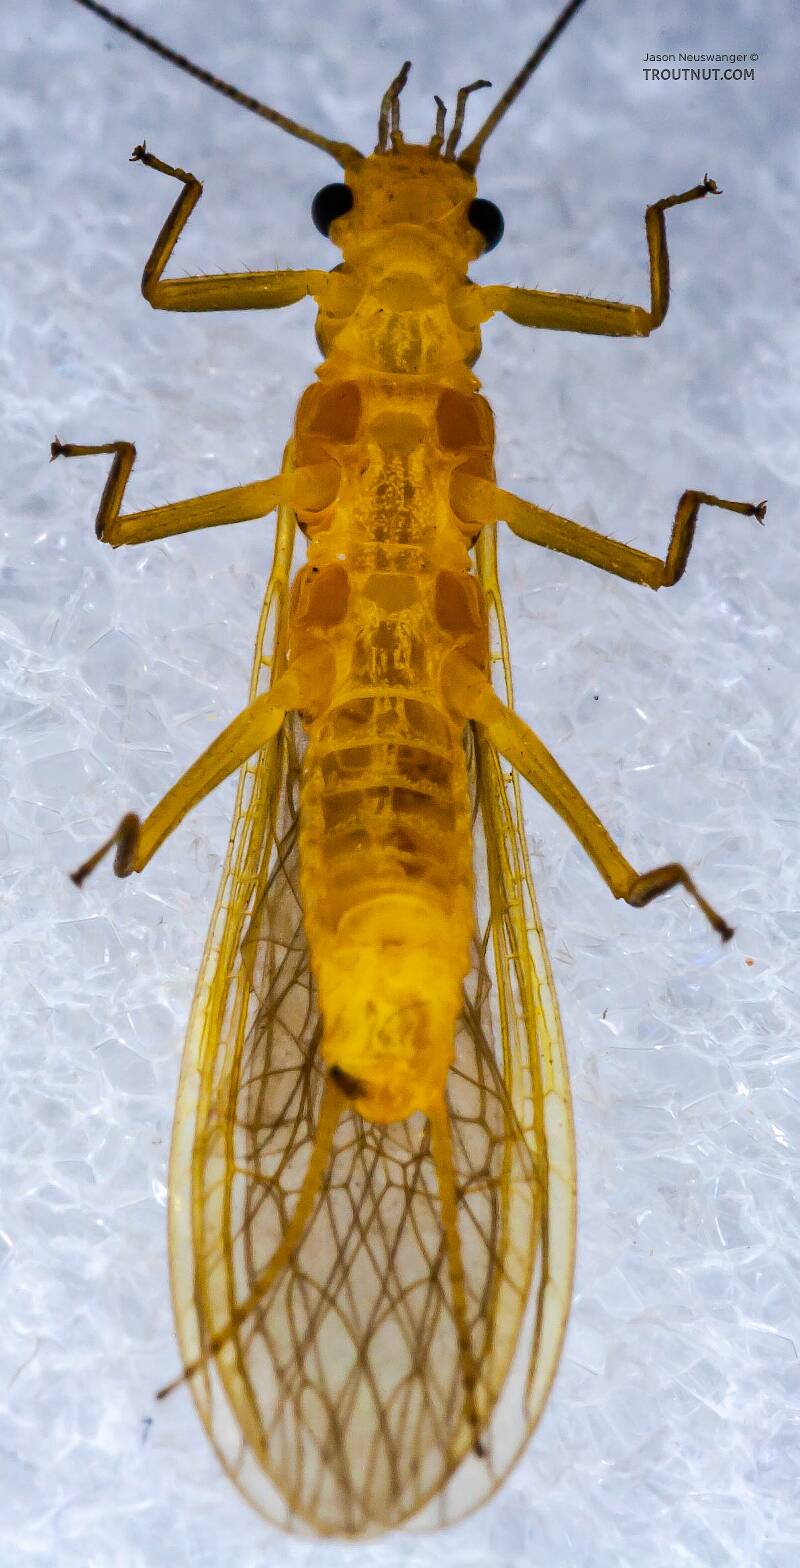 Ventral view of a Female Perlesta (Perlidae) (Golden Stone) Stonefly Adult from Enfield Creek in New York